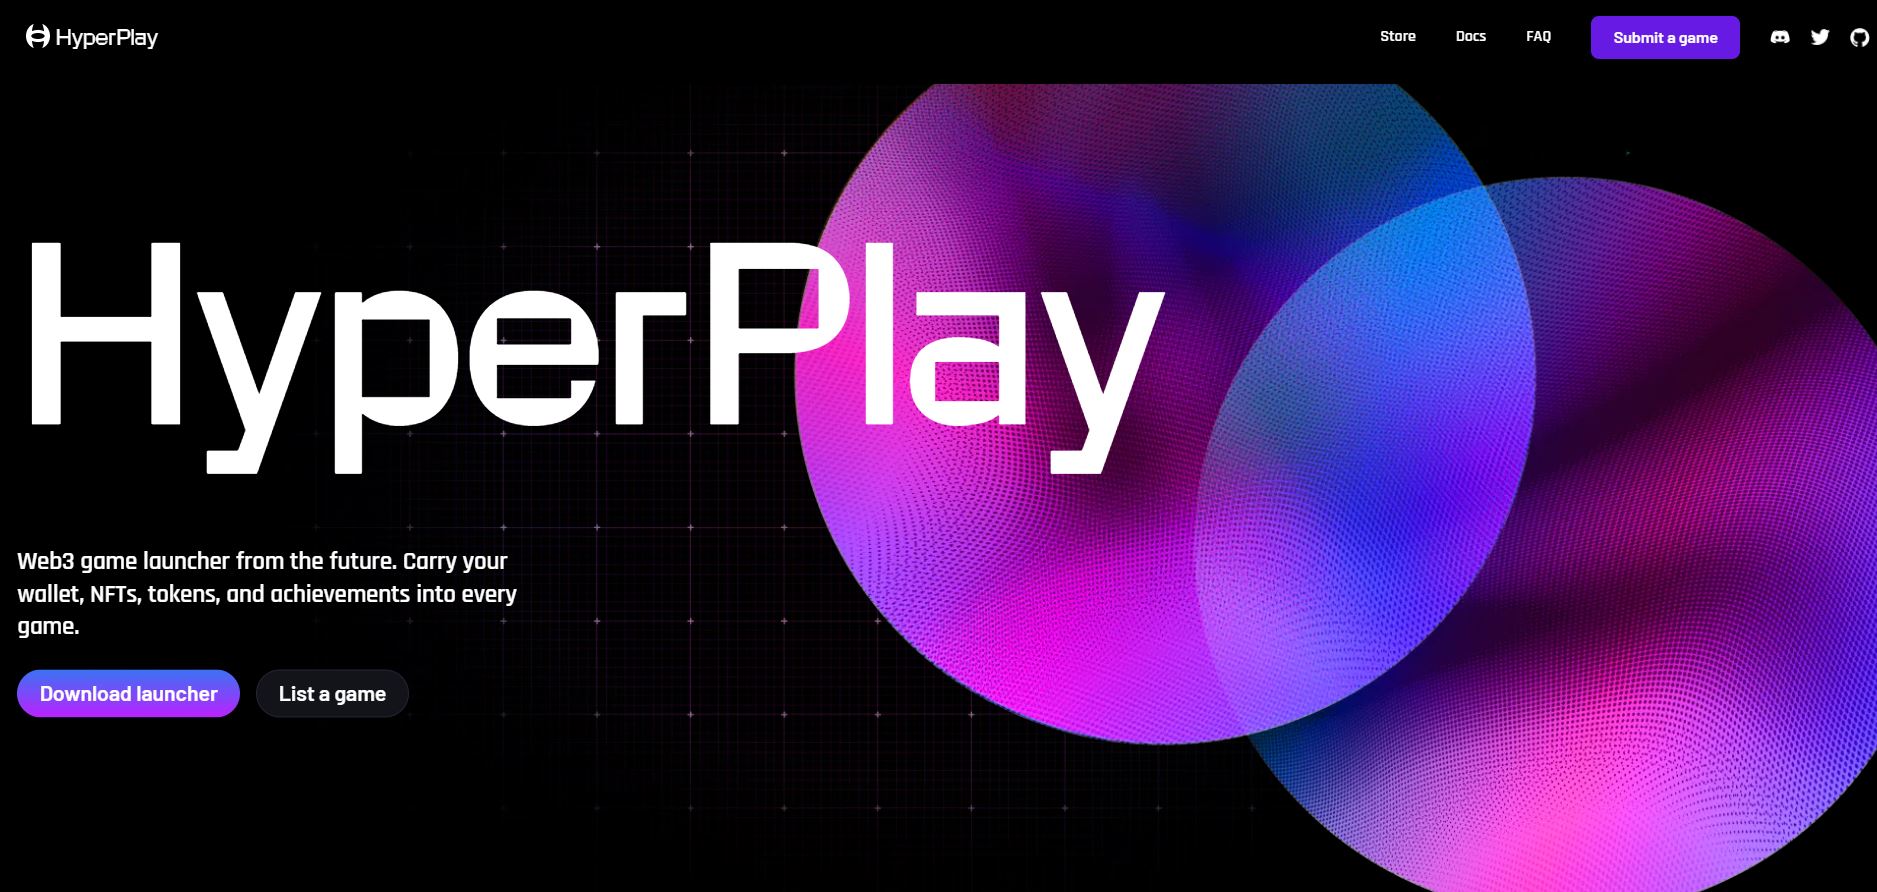 With an impressive $12 million raised in their Series A funding round, HyperPlay is revolutionizing the computer games industry